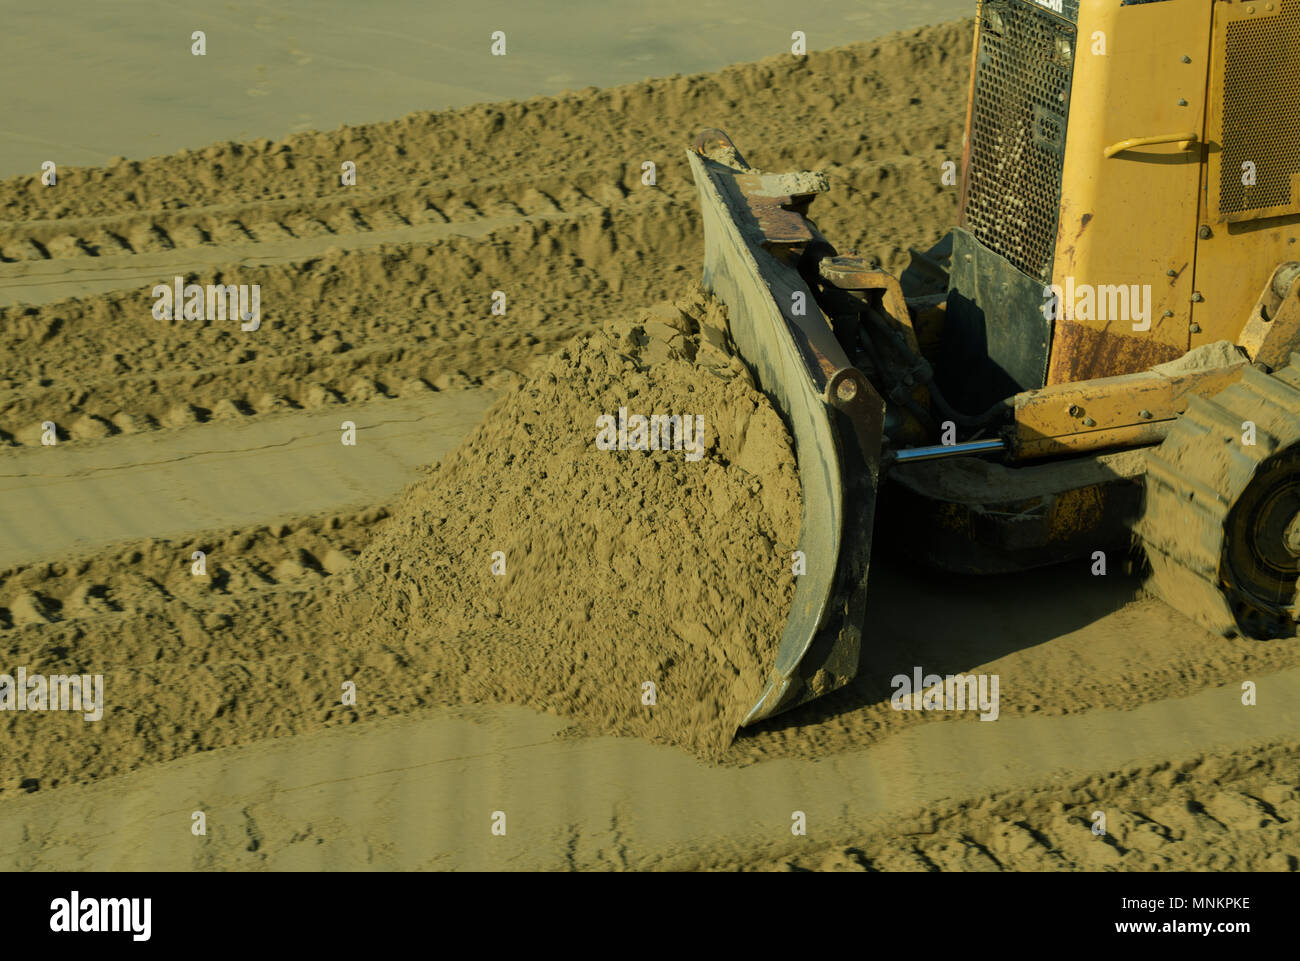 Close-up, detail, scraper of yellow bulldozer pushing wet sand, construction project, blur, copy space Stock Photo